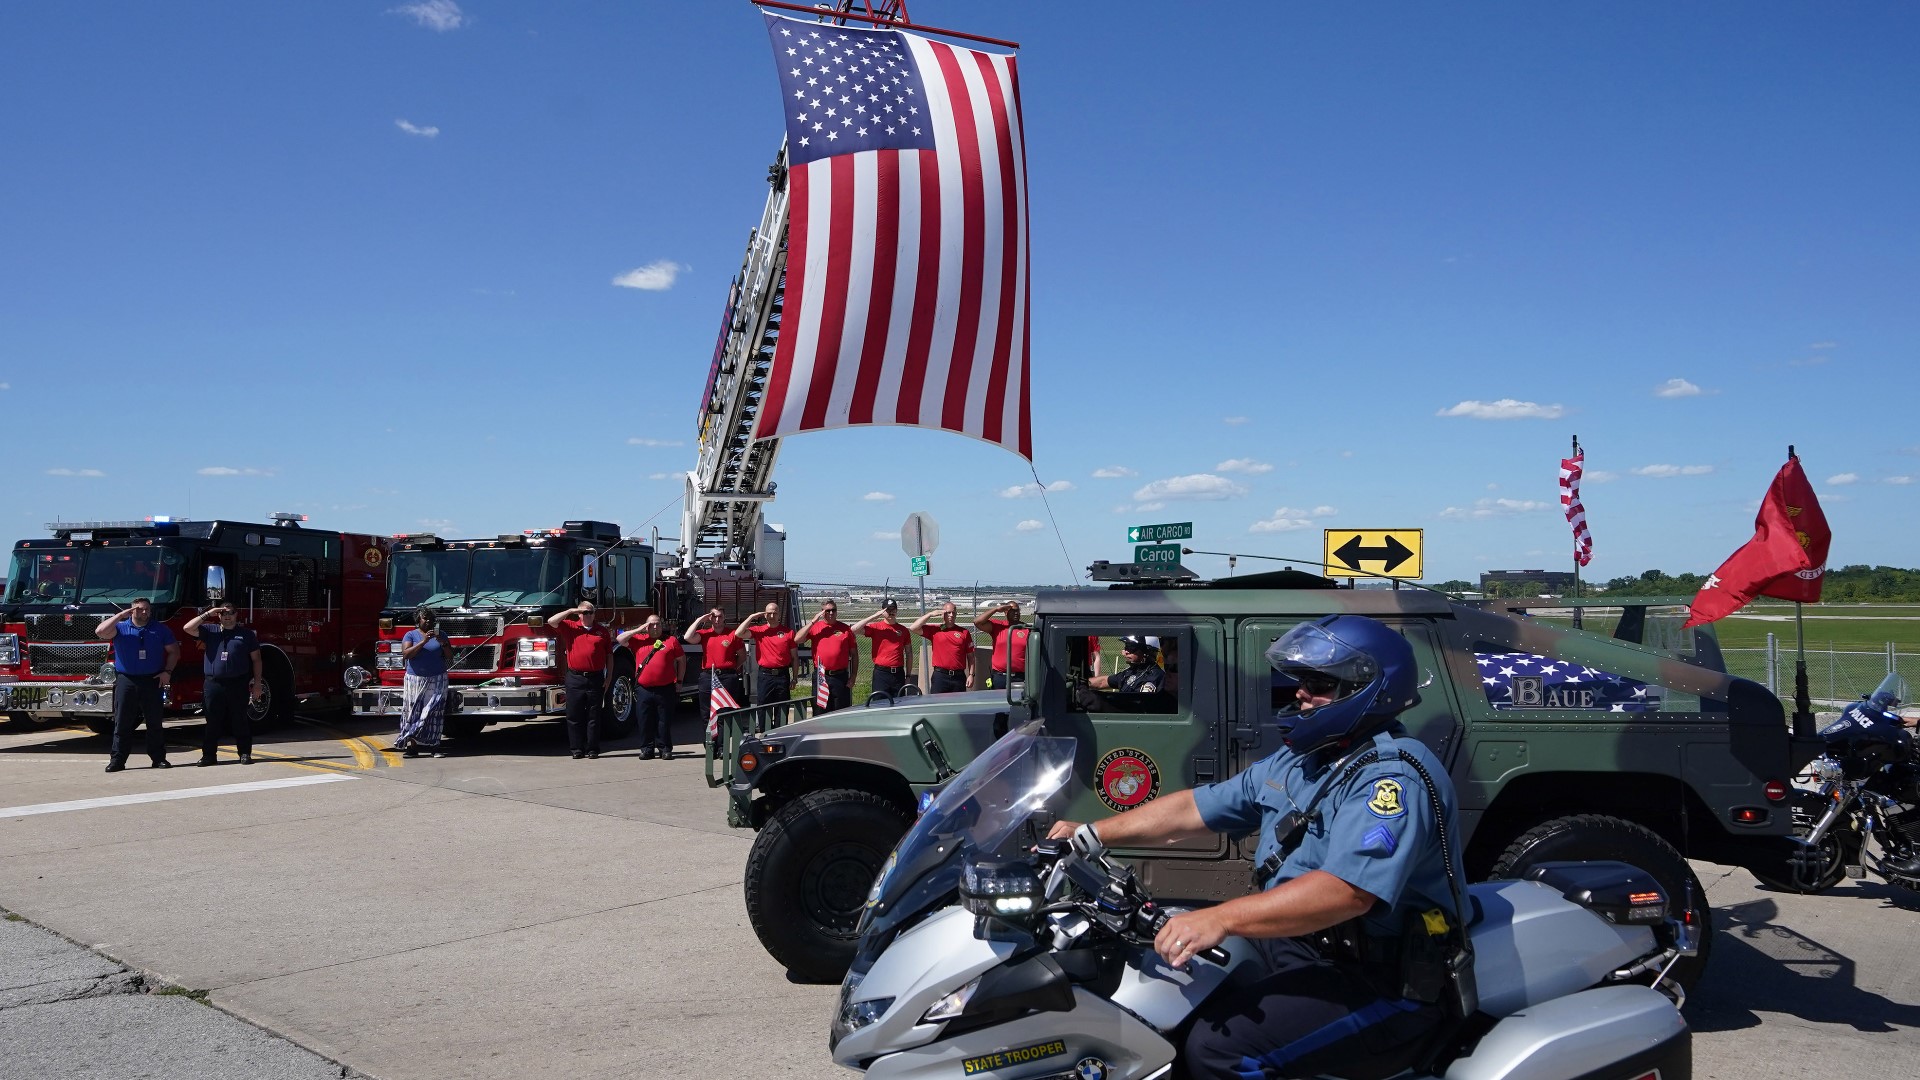 A stream of vehicles and motorcycles escorted Lance Cpl. Schmitz's remains, while flag-waving residents lined the route to honor the hero